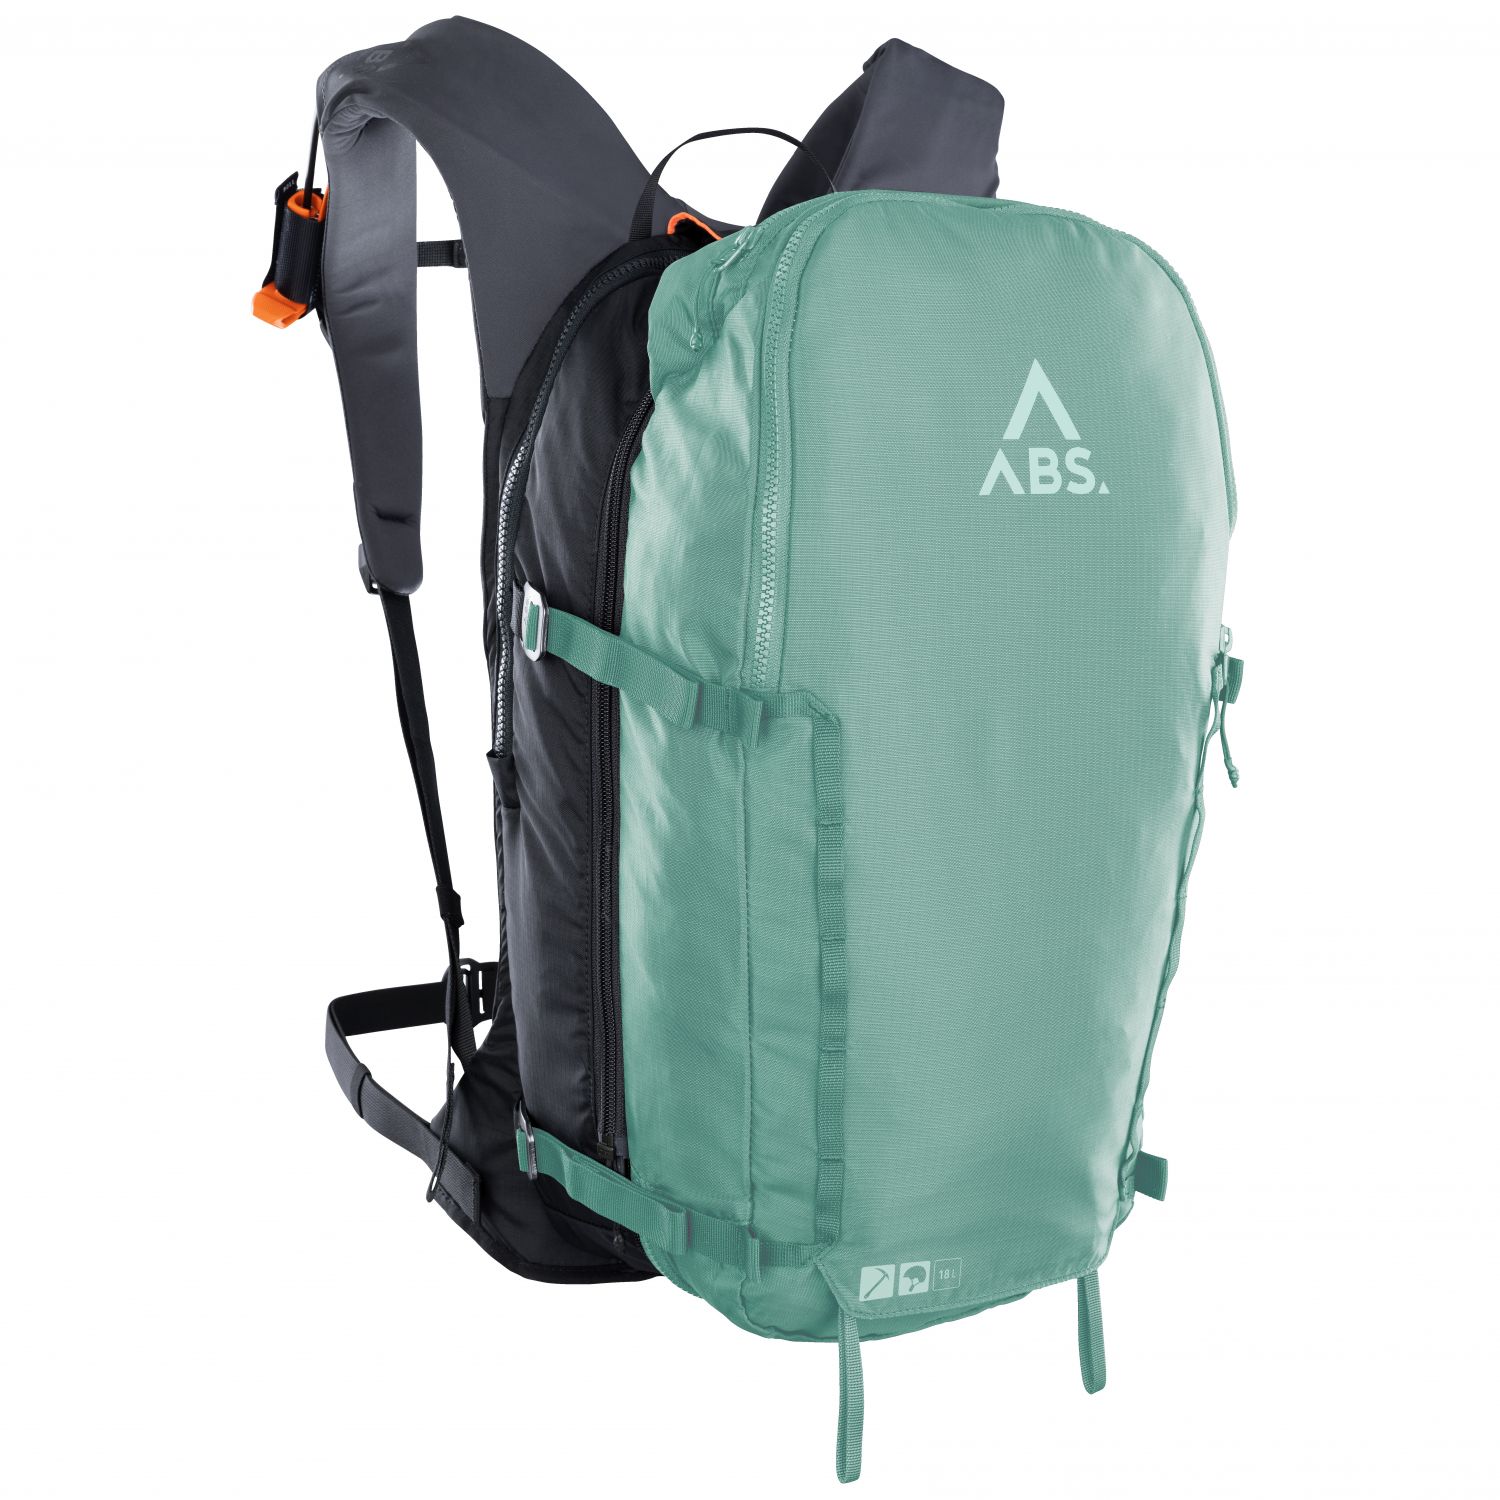 ABS A.Light E, 18L, avalanche backpack, sea green